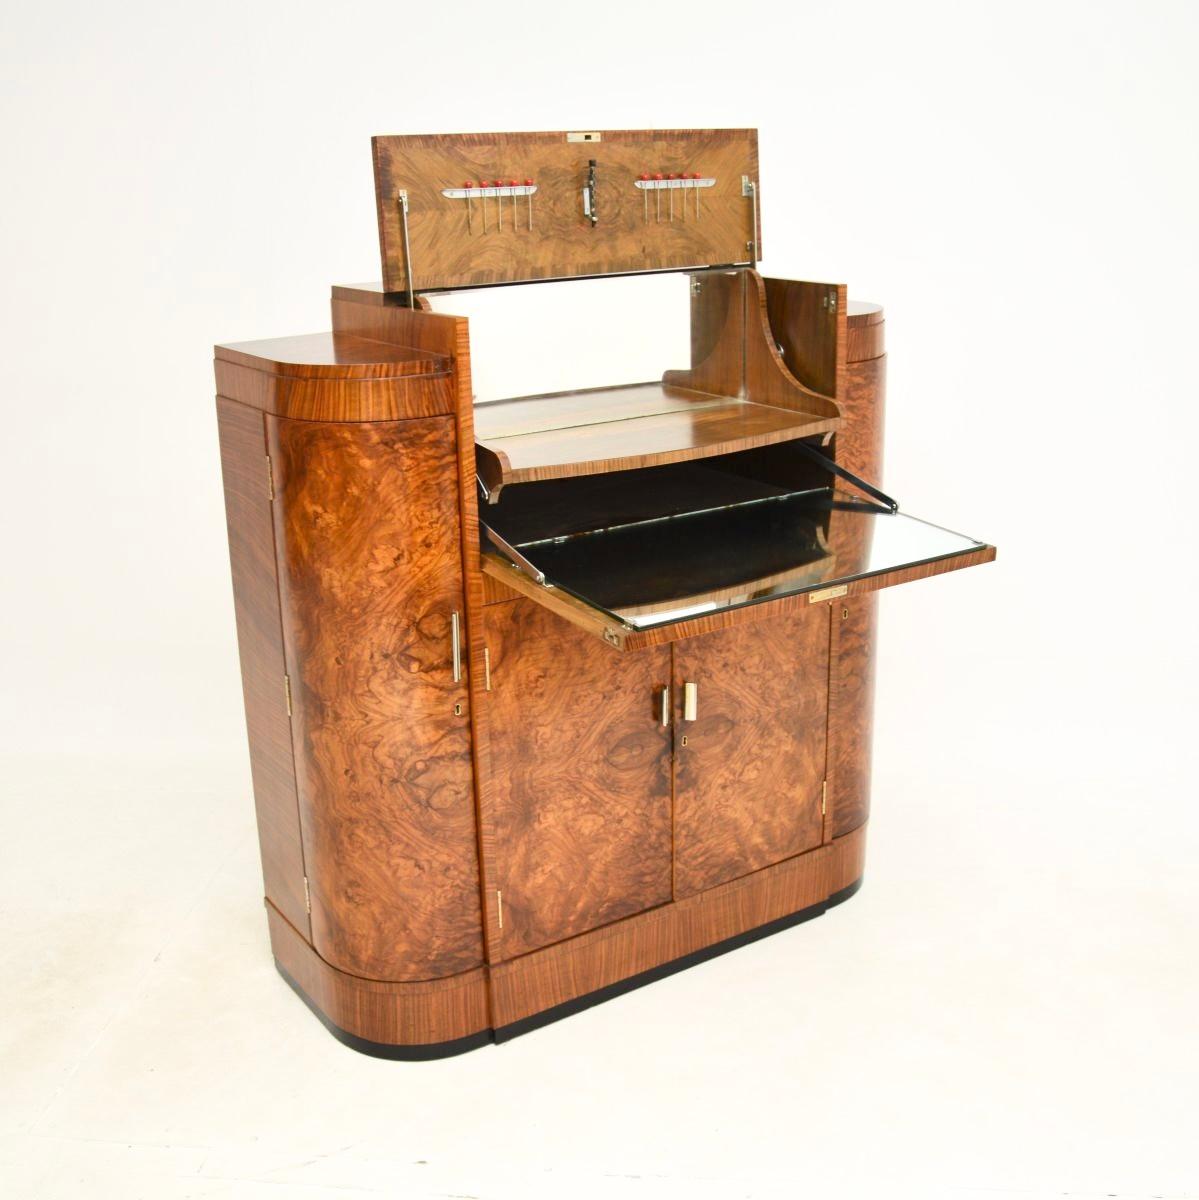 An absolutely stunning Art Deco burr walnut cocktail drinks cabinet by Maple and Co. This was made in England, it dates from the 1920-30’s.

The quality is outstanding, this is extremely well made, it has a very useful and clever design. The main